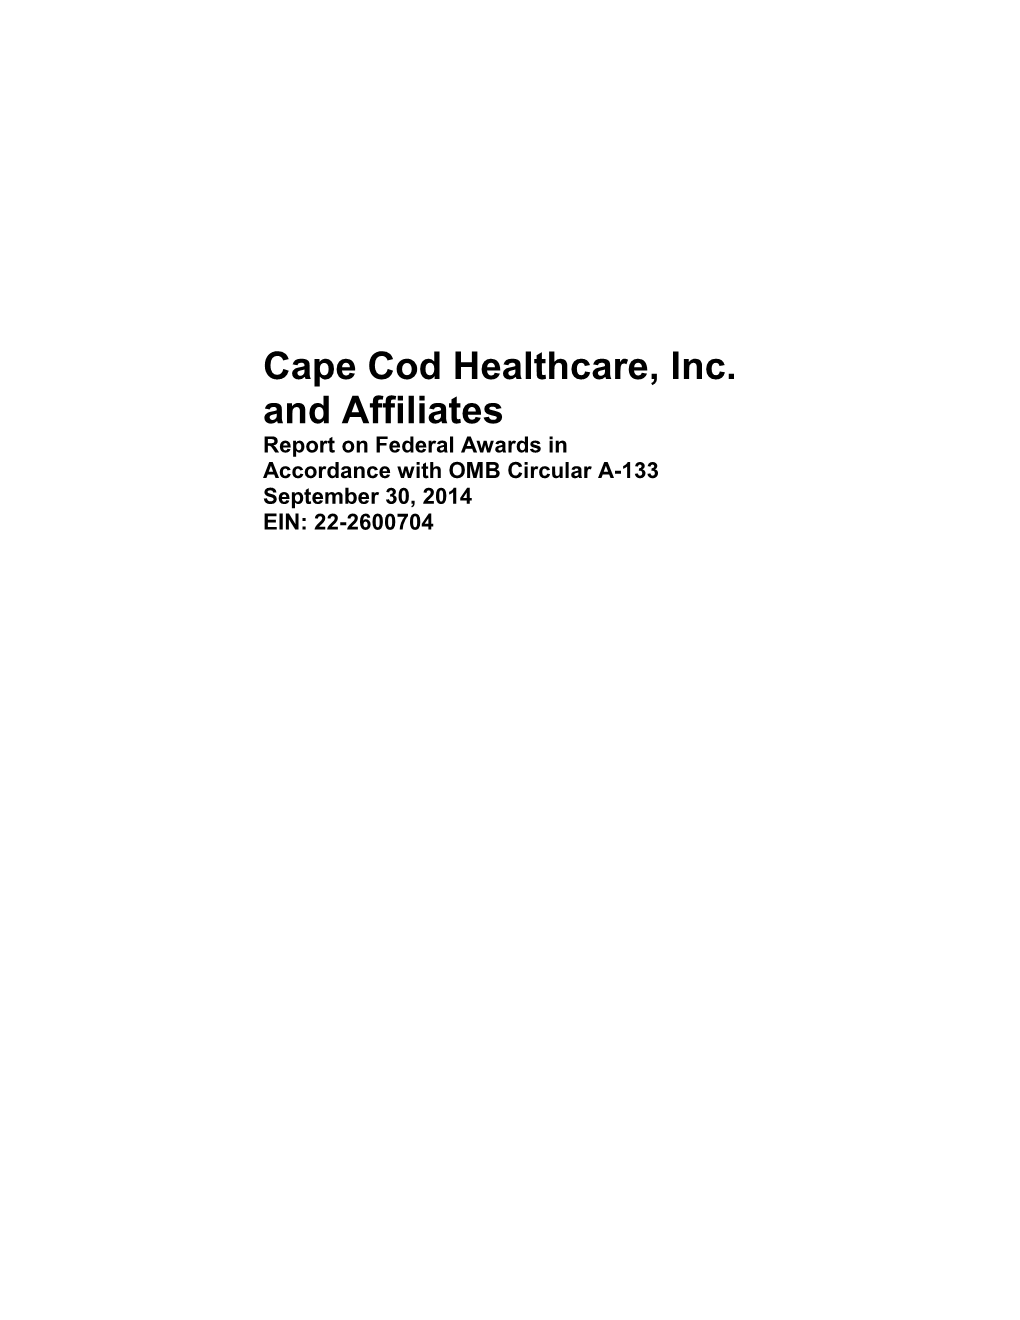 Cape Cod Healthcare, Inc. and Affiliates Report on Federal Awards in Accordance with OMB Circular A-133 September 30, 2014 EIN: 22-2600704 Cape Cod Healthcare, Inc